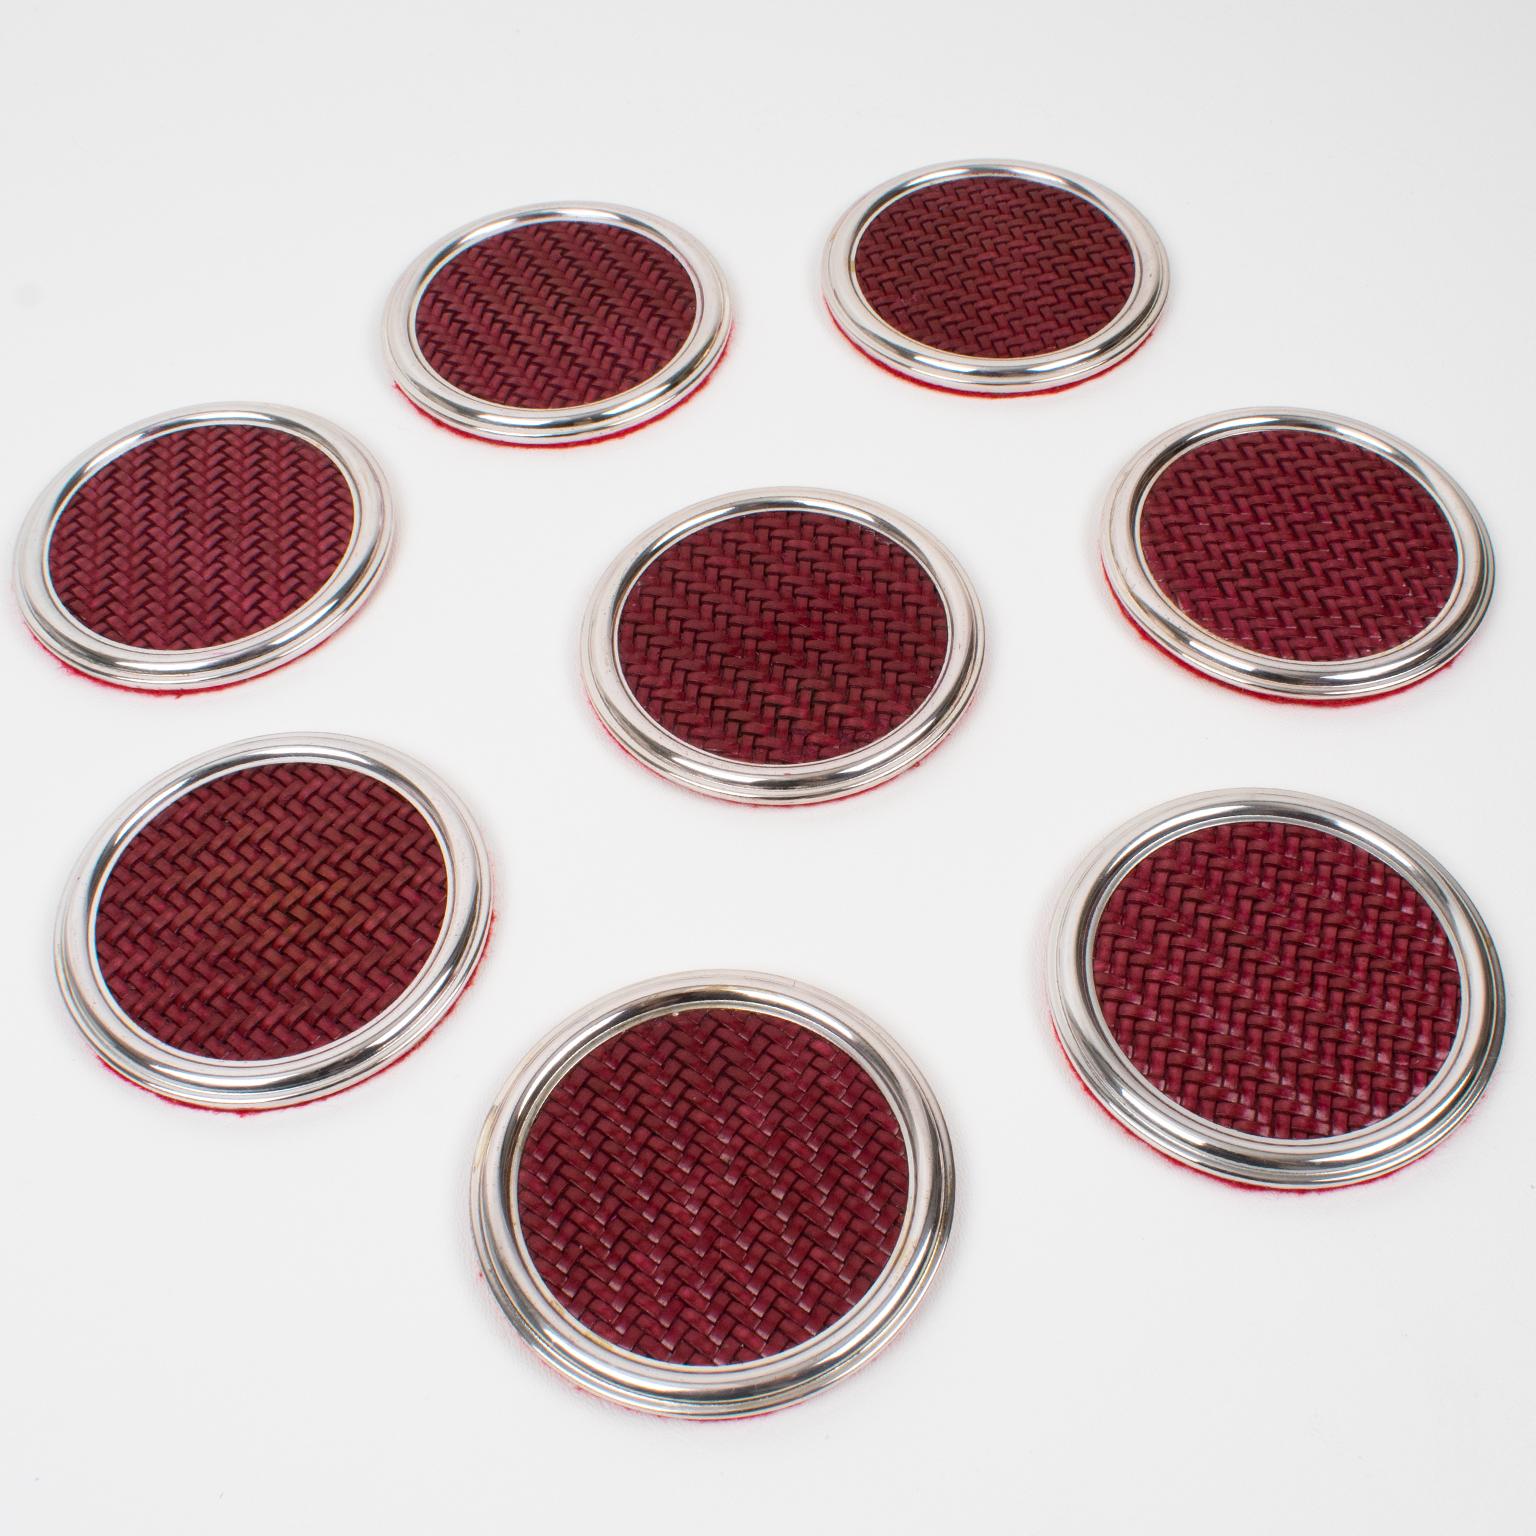 This lovely Mid-Century modernist barware set of eight coasters was crafted in Italy in the 1960s. The rounded shape boasts a silver plate stepped framing complemented by braided genuine red leather with a chevron pattern. The underside is protected